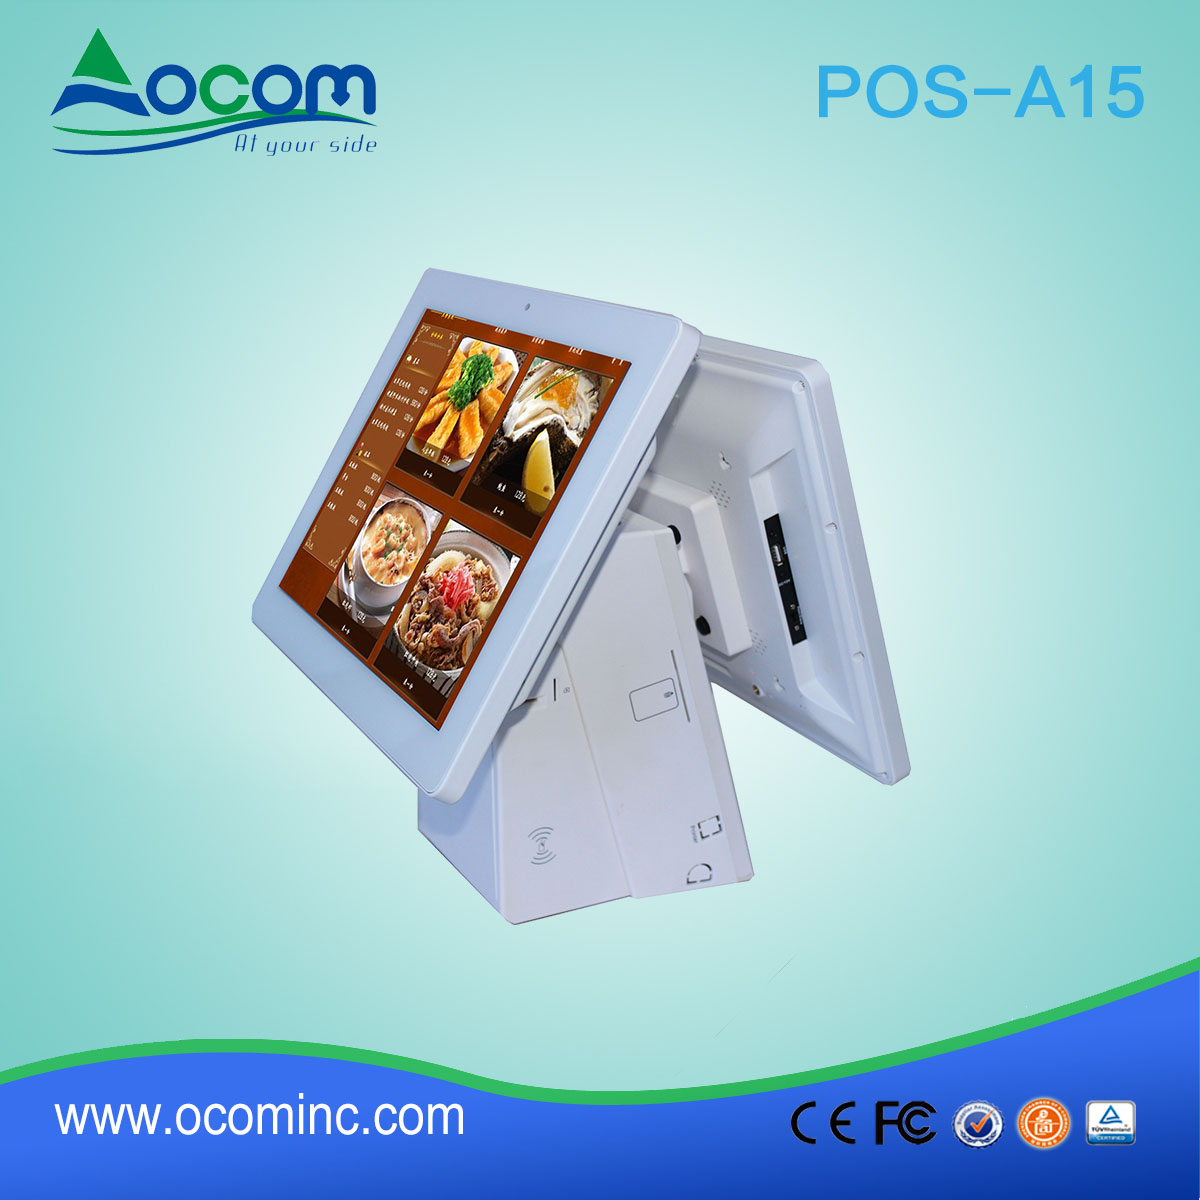 (POS-A15)Windows/ Android Touch screen POS Terminal With 58mm/80mm Thermal Printer